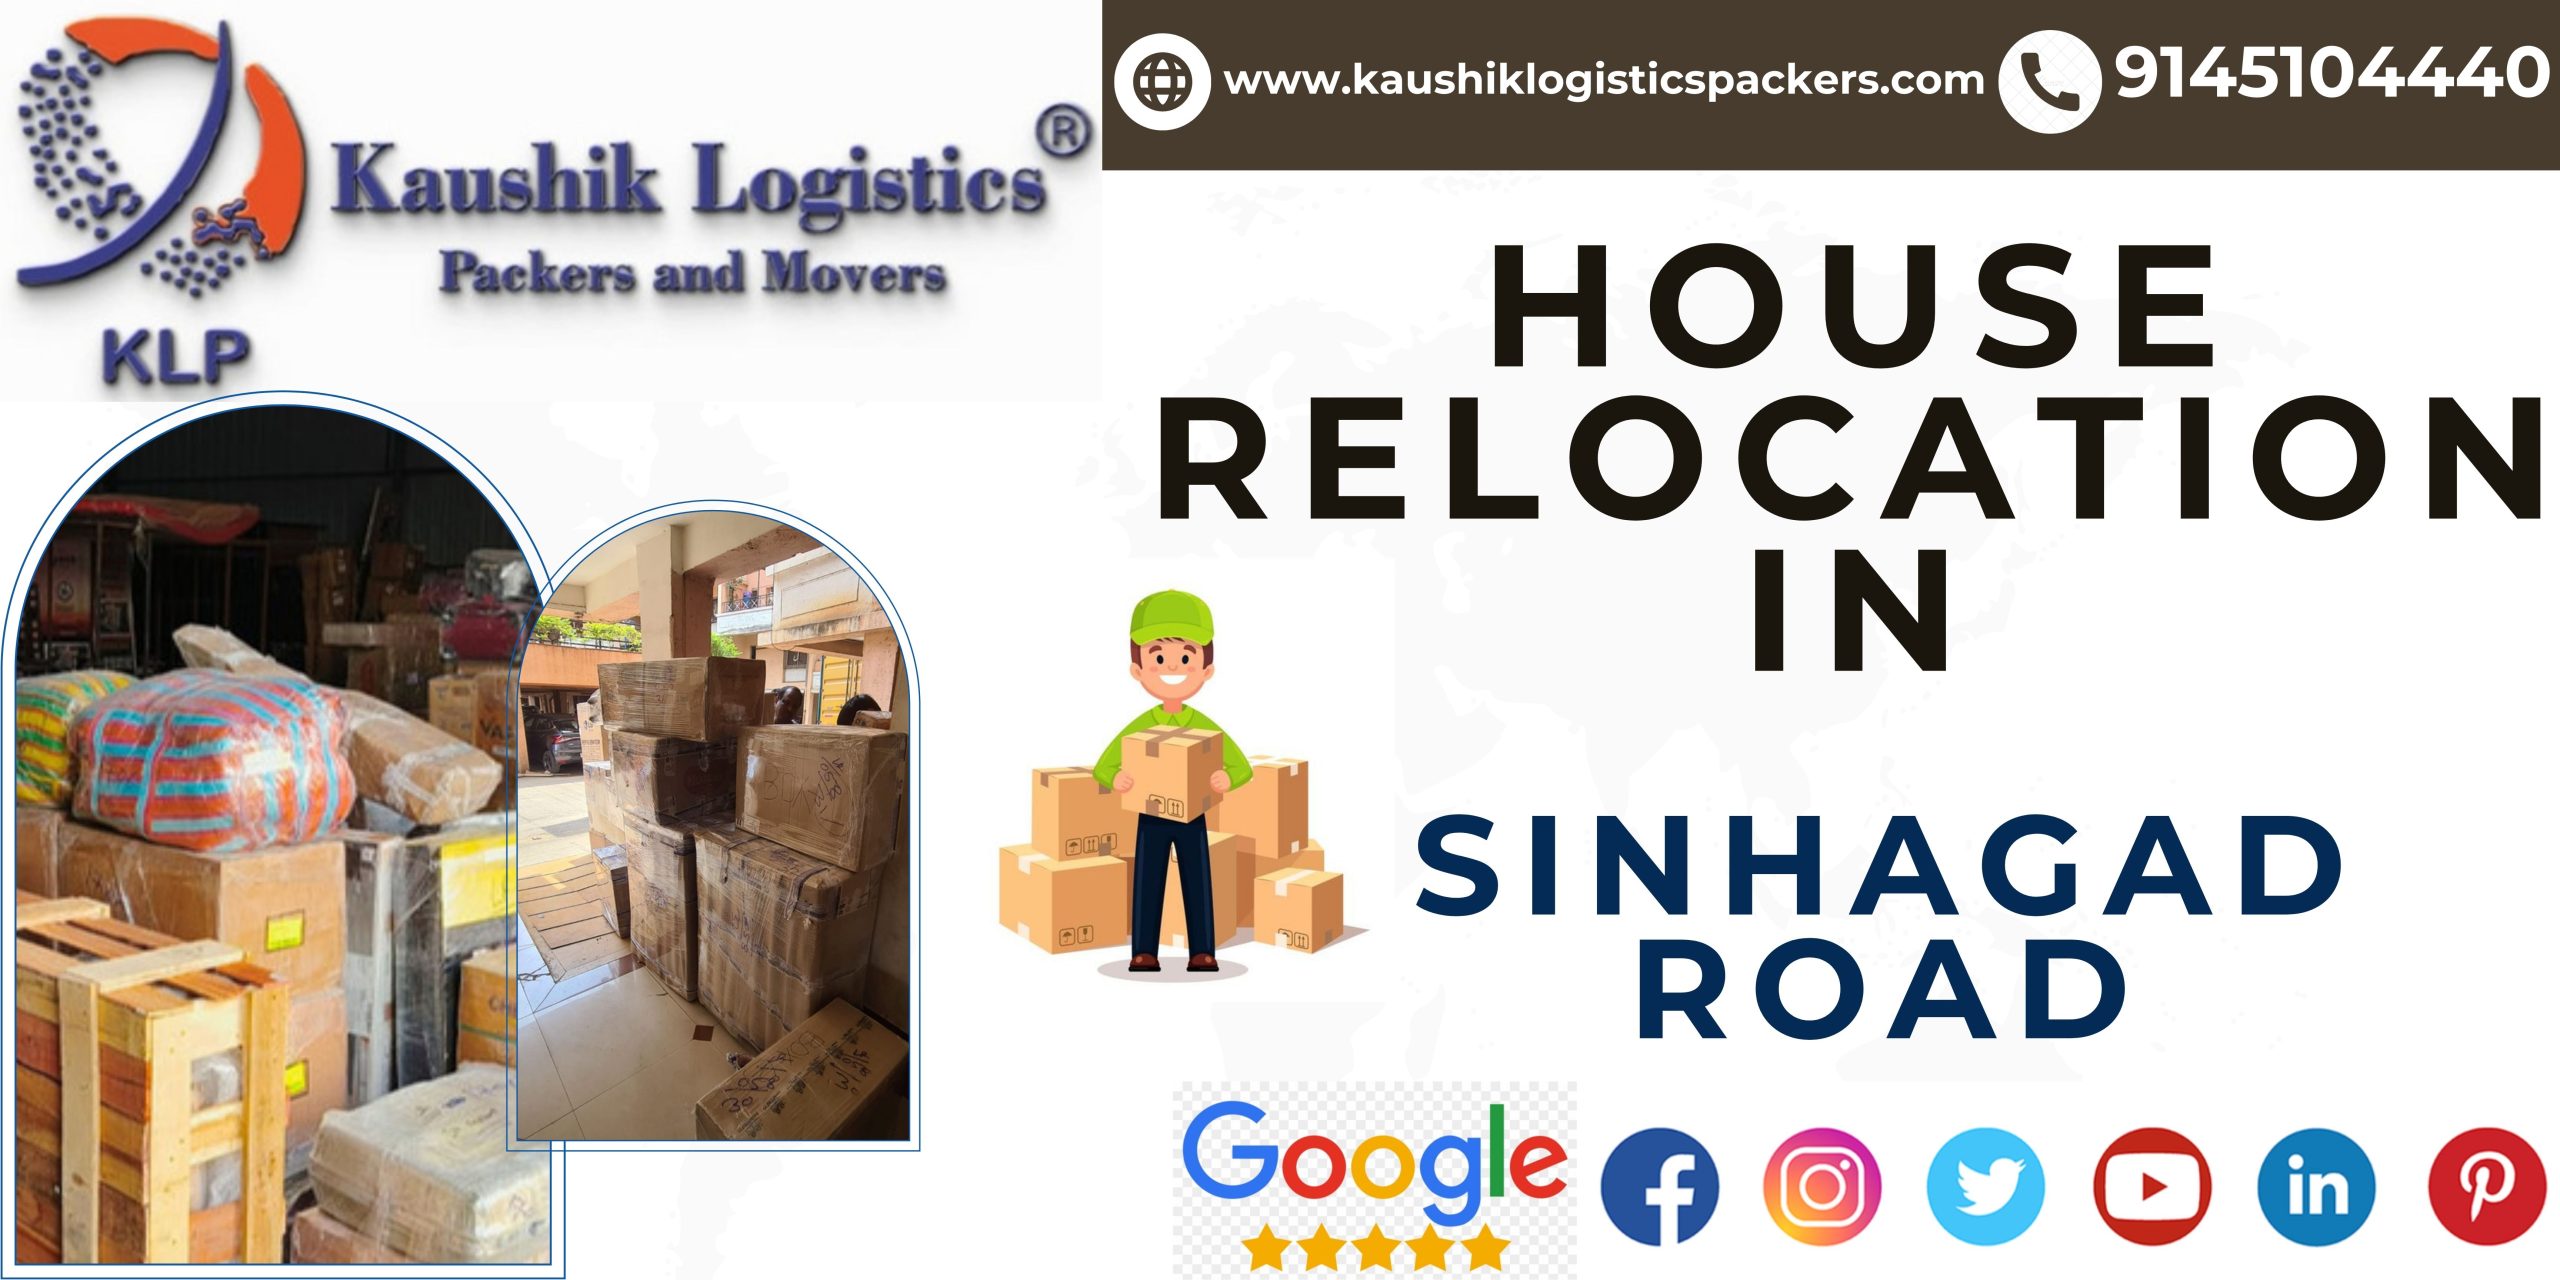 Packers and Movers In Sinhagad Road